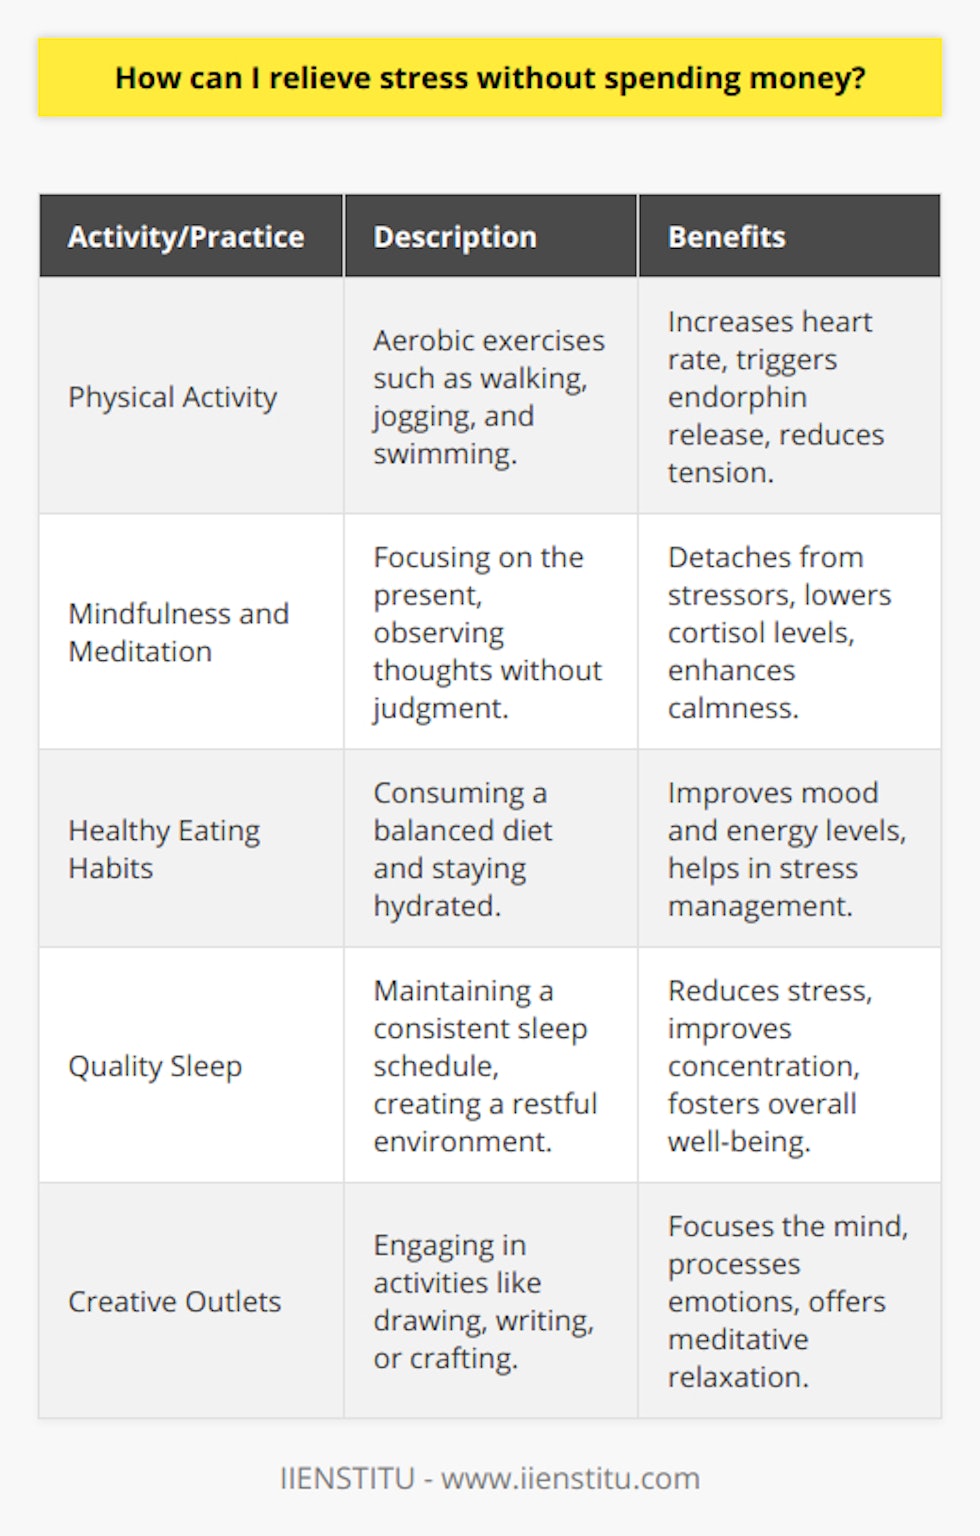 Relieving stress is an essential component of maintaining a healthy lifestyle. Fortunately, there are plenty of ways to de-stress that don't cost a dime. Here is a list of activities and practices that can help mitigate stress without impacting your wallet.Physical Activity:Engaging in physical activity is a tried-and-true method for reducing stress. Aerobic exercises, such as walking, jogging, cycling, or swimming, are especially effective because they increase the heart rate and trigger the release of endorphins, chemicals in the brain that are natural stress fighters. Even simple activities like doing yoga at home or dancing to your favorite music can boost your mood and decrease tension.Mindfulness and Meditation:Mindfulness meditation is a practice that involves concentrating on the present moment and observing thoughts and sensations without judgment. This practice can help you detach from stressors and gain a clearer, calmer perspective. Dedicated practice of mindfulness can also lower cortisol levels, the hormone associated with stress. To start, allot a few minutes each day to sit in a quiet space and focus on your breathing, gradually increasing the time as you become more comfortable with the practice.Healthy Eating Habits:Stress and diet are closely related. Consuming a balanced diet with plenty of fruits, vegetables, lean proteins, and whole grains can improve your overall mood and energy levels, which in turn can help manage stress. Steering clear of high-sugar snacks and caffeinated beverages that can lead to energy crashes is also beneficial. Drinking plenty of water is equally important, as dehydration can cause irritability and concentration problems.Quality Sleep:A lack of sleep can exacerbate stress. Ensure you get seven to nine hours of quality sleep per night by sticking to a consistent sleep schedule, creating a restful bedroom environment, and avoiding electronic screens before bedtime. Establishing a calming pre-sleep routine, such as reading or taking a warm bath, can also improve your sleep quality.Creative Outlets:Creative activities like drawing, writing, or playing an instrument offer a productive avenue for expressing and processing your emotions. They help focus the mind on the task at hand, rather than on stressors. Even if you're not artistically inclined, simple endeavors like adult coloring books or DIY crafts can be meditative and soothing.To conclude, stress relief doesn't have to come with a price tag. By incorporating physical activity, mindfulness, nutritious eating, adequate sleep, and creative expression into your life, you can find balance and tranquility without spending money. These practices foster a sense of control and peace that can combat the pressures of daily life, ultimately contributing to a healthier, happier you.